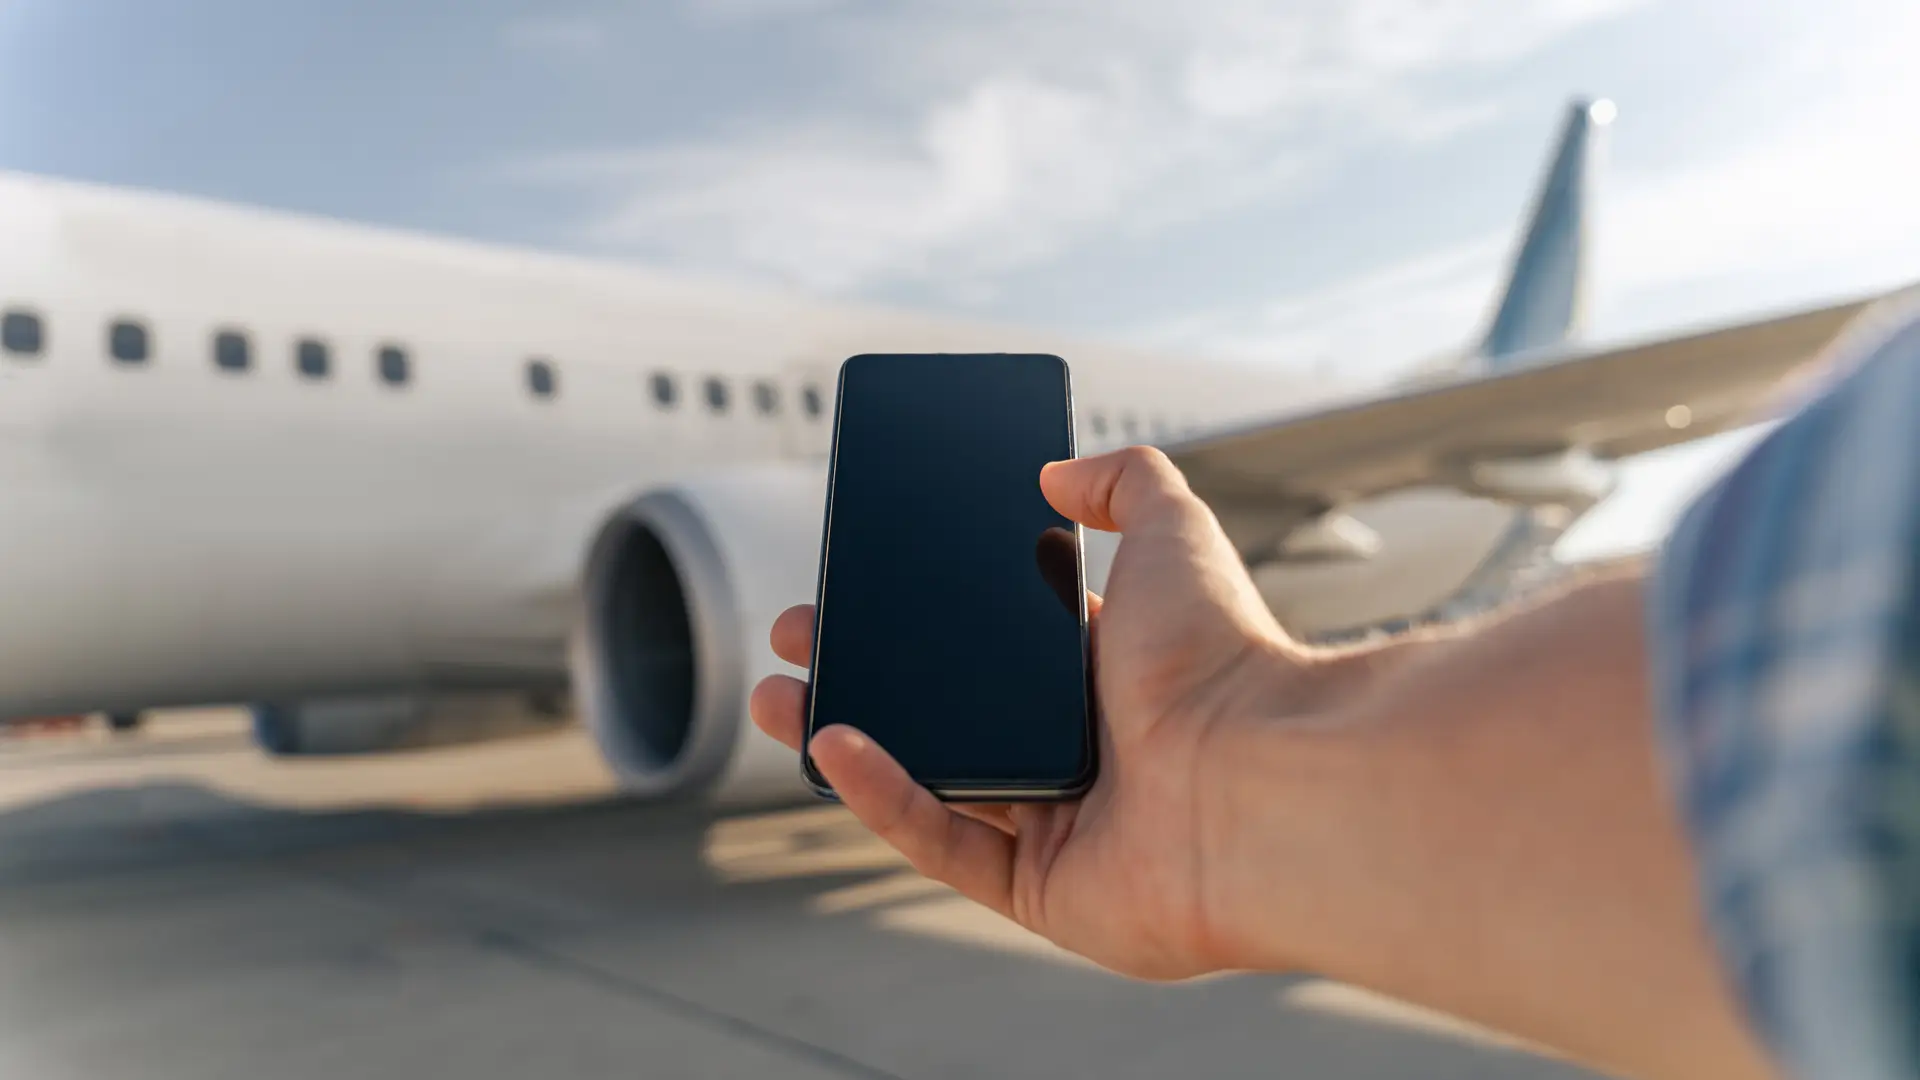 Hand holding a mobile in front of a plane representing Sky roaming